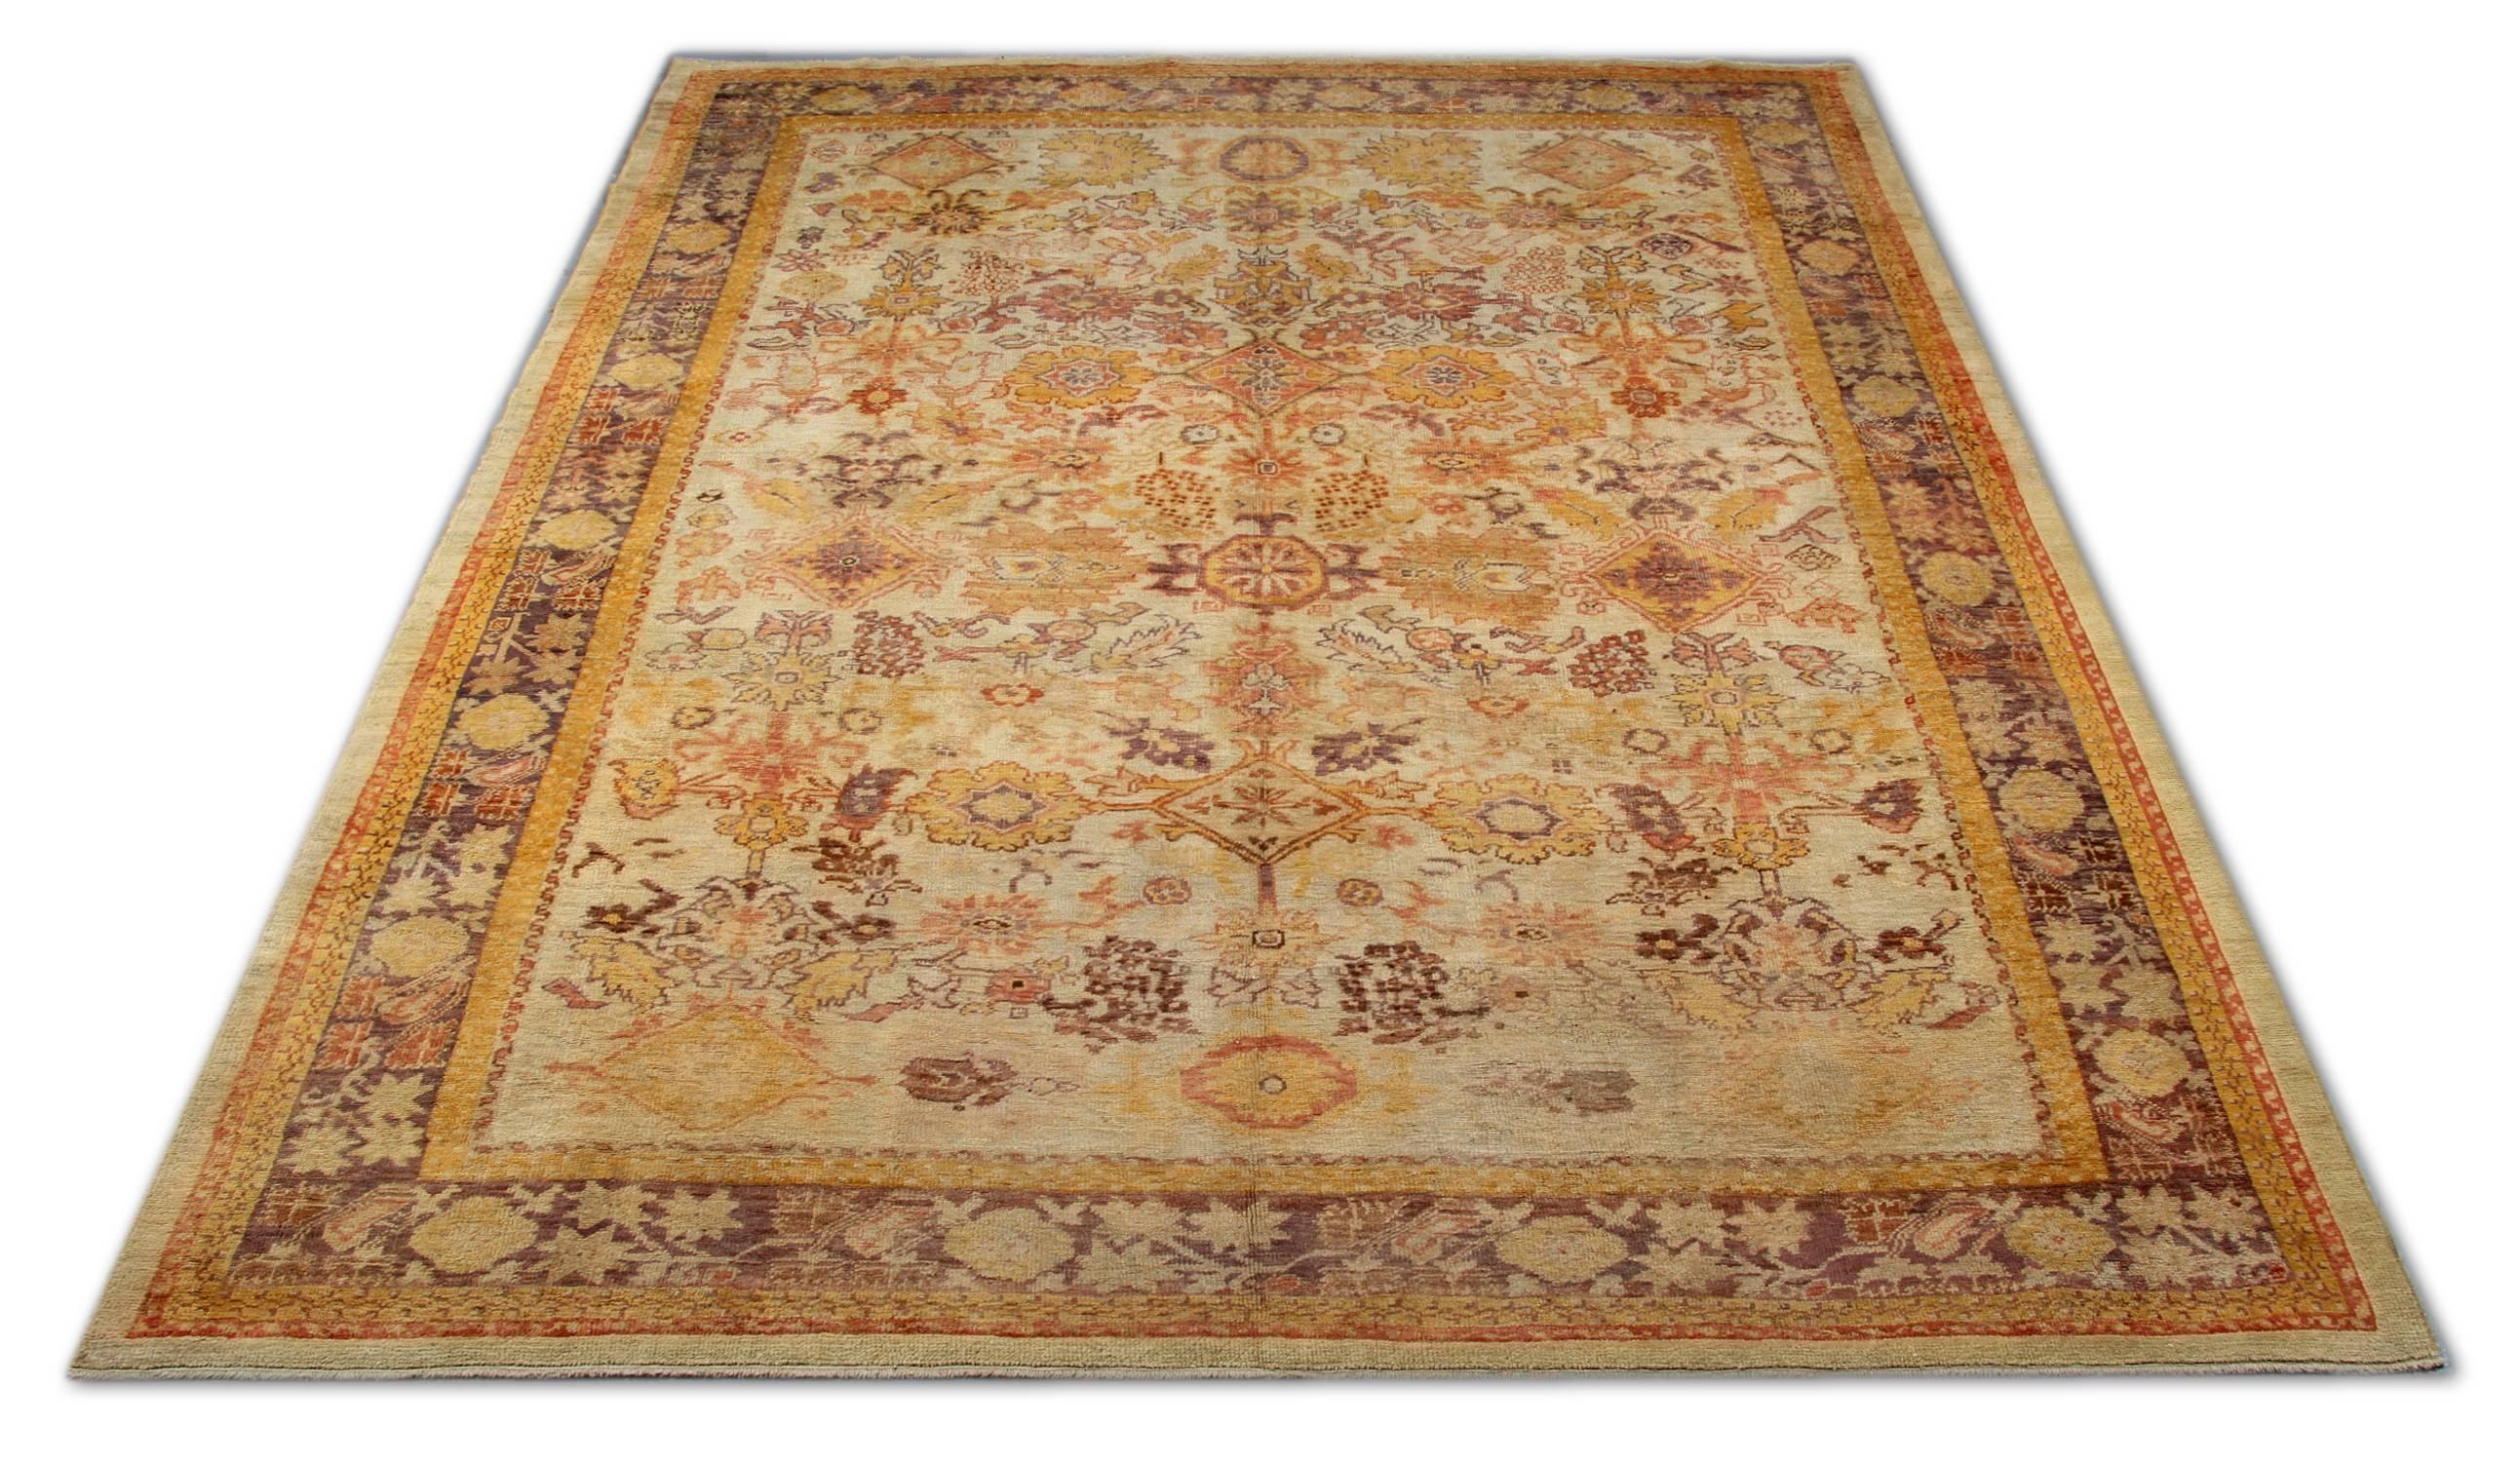 This antique rug is an oriental rug with a yellow background and is a kind of beautiful hand-knotted Turkish carpets or Anatolian rugs with geometric rug pattern and very elegant tribal and floral rug design. These wool rugs have vibrant natural